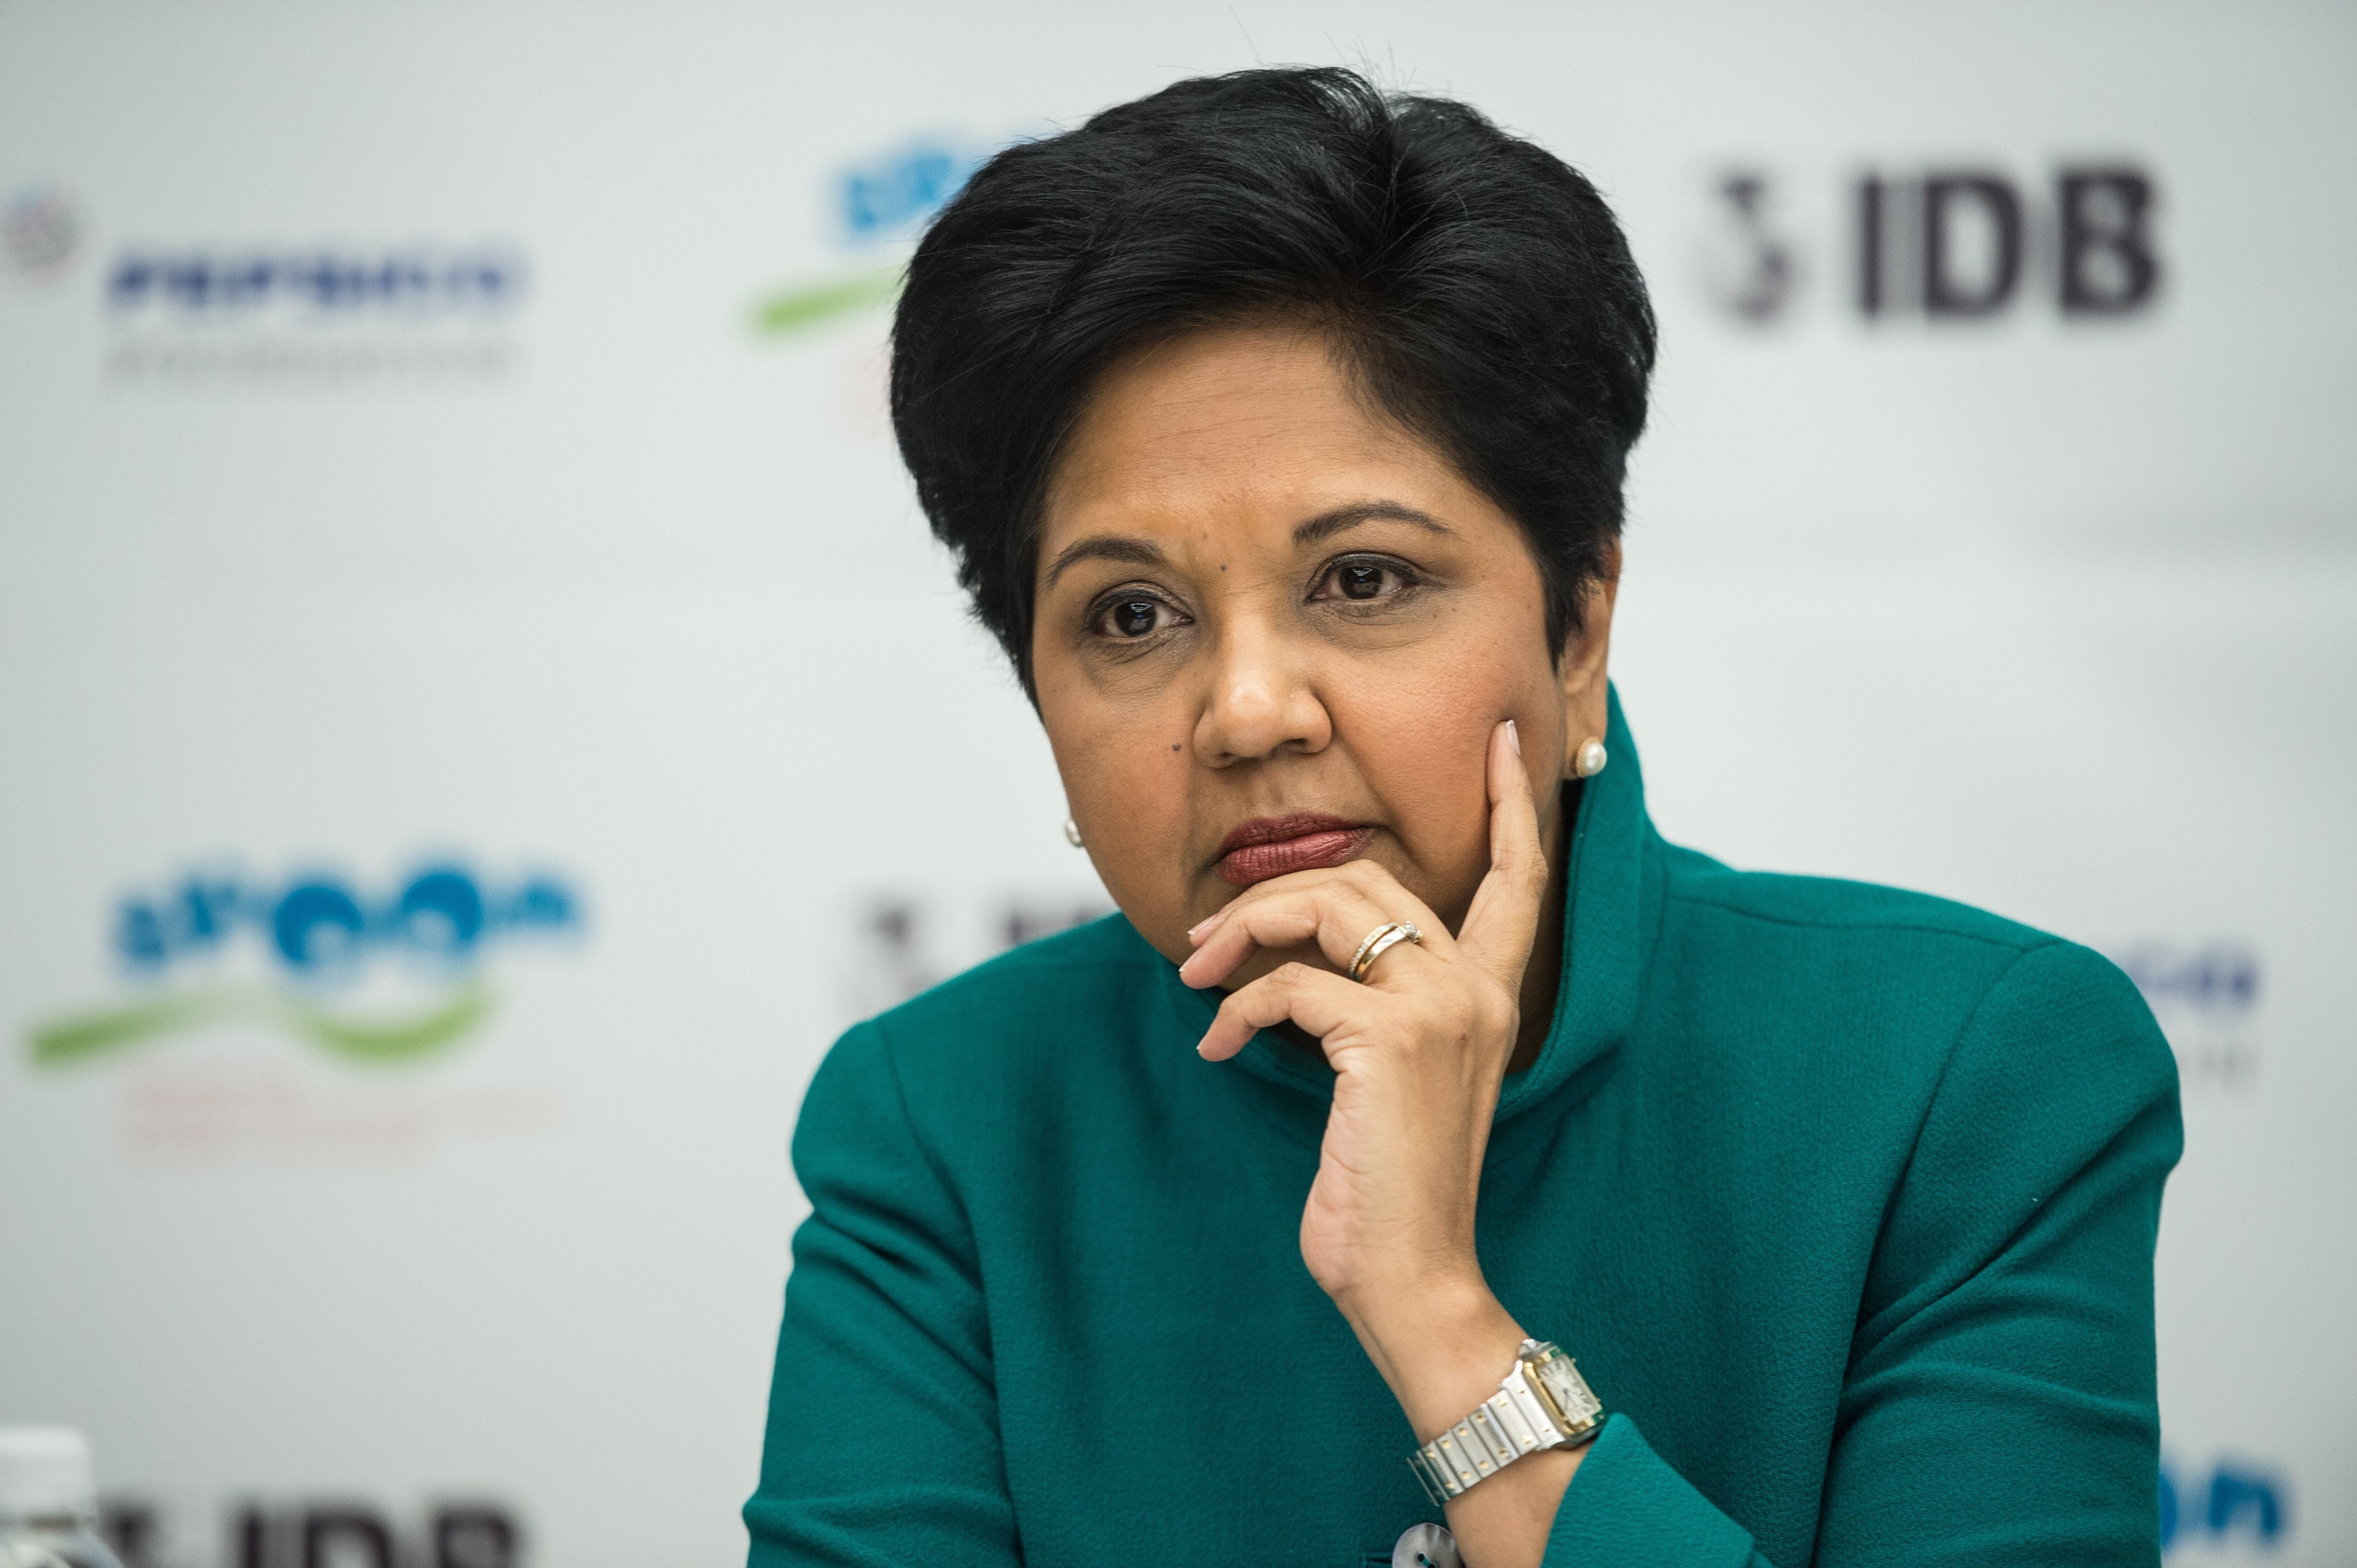 Pepsico CEO Indra Nooyi during the announcement of a partnership in Washington, D.C. on Oct. 15, 2014.